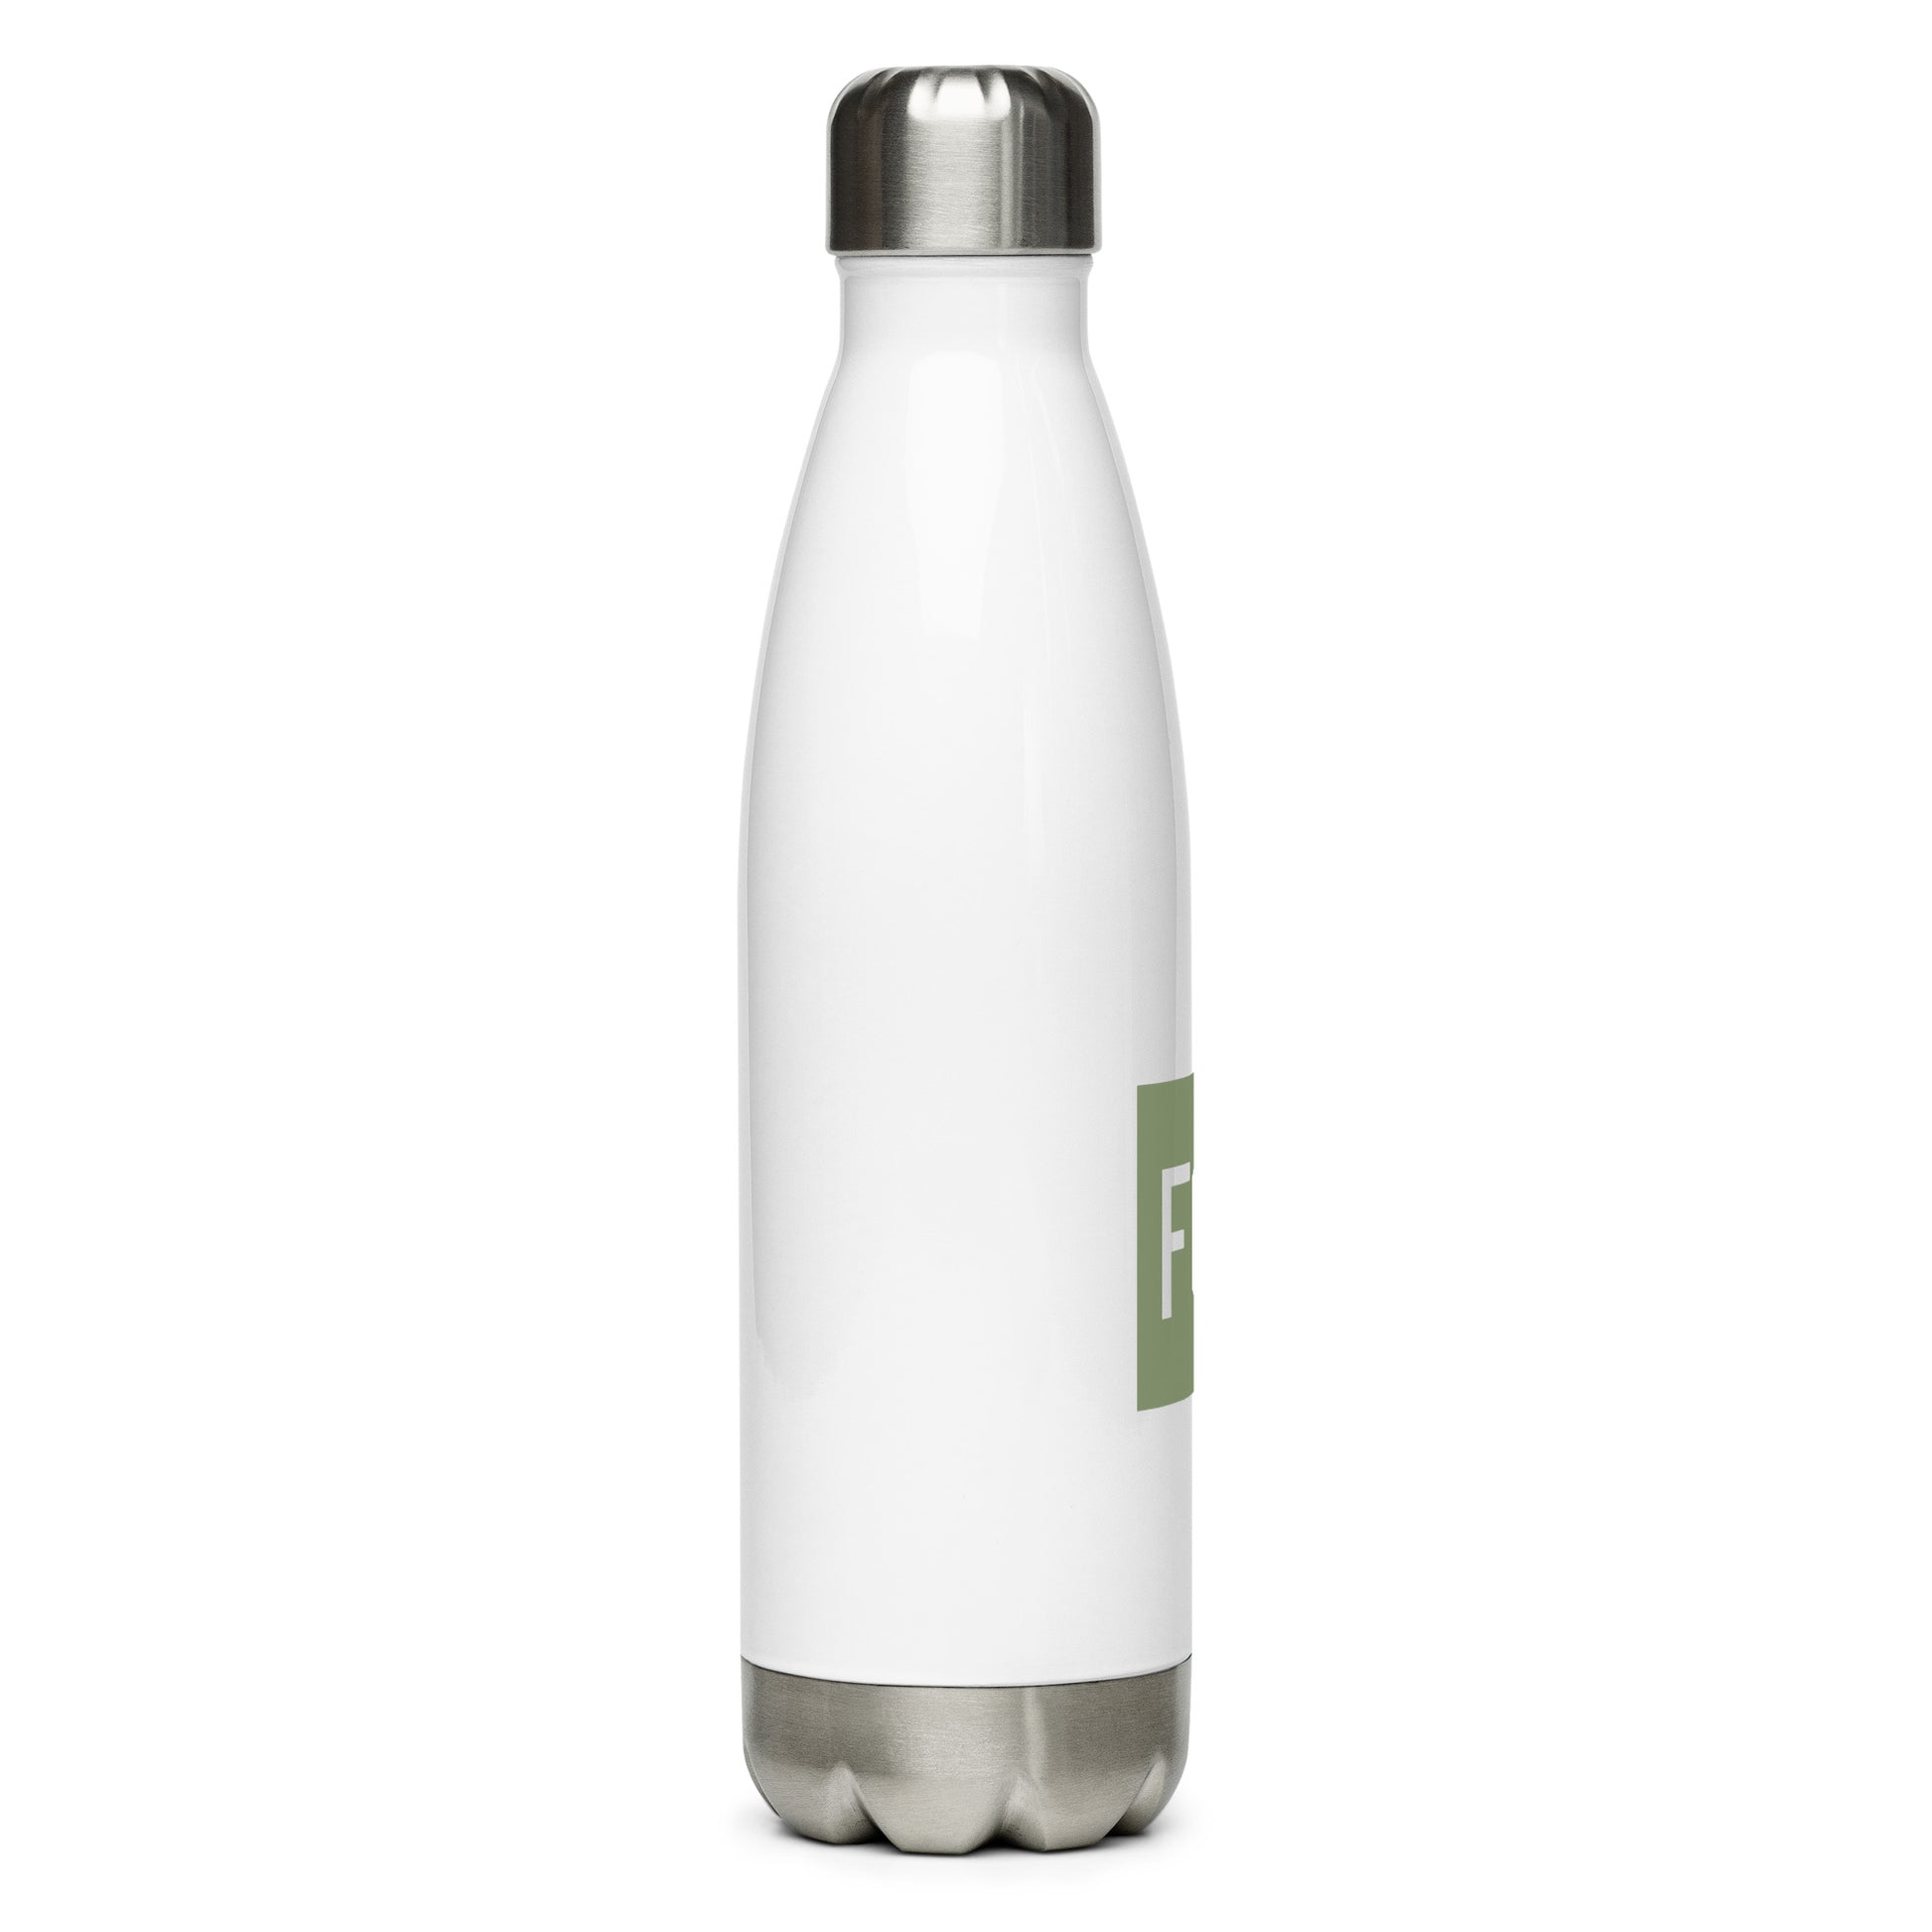 Aviation Gift Water Bottle - Camo Green • FCO Rome • YHM Designs - Image 07